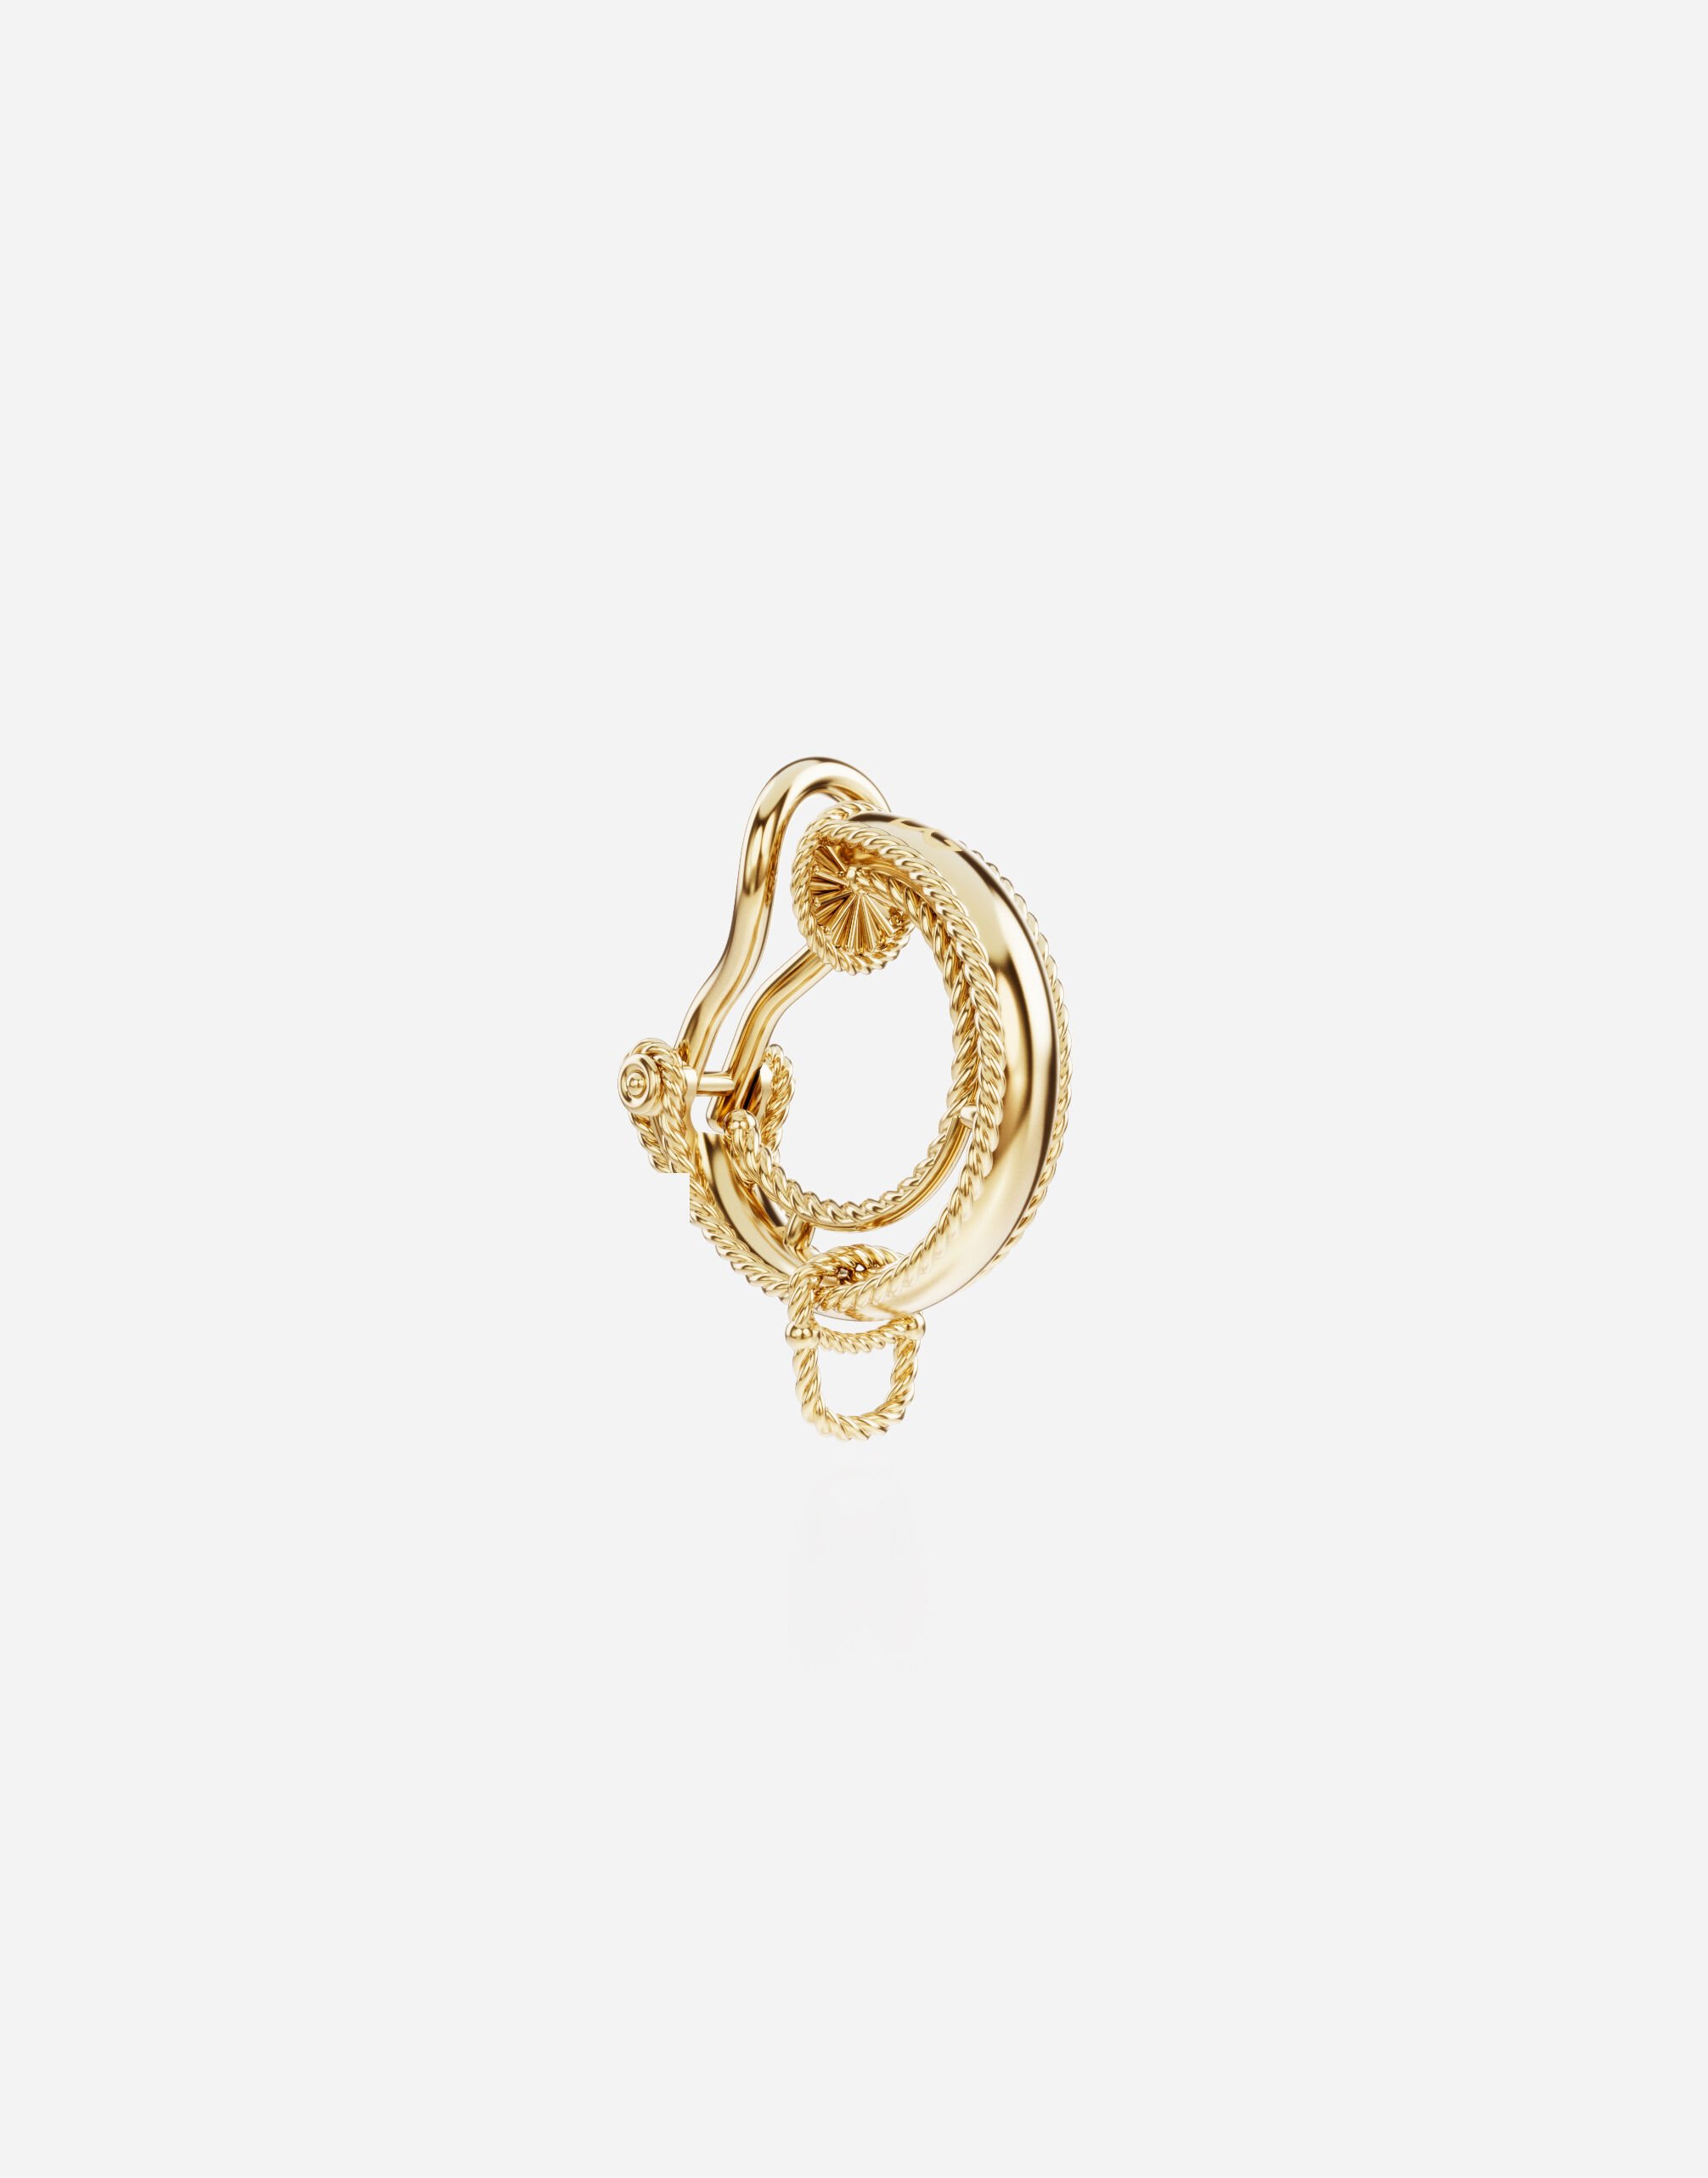 Dolce & Gabbana Rainbow Alphabet clip-on earring in yellow 18kt gold Gold WAQA4GWPE01